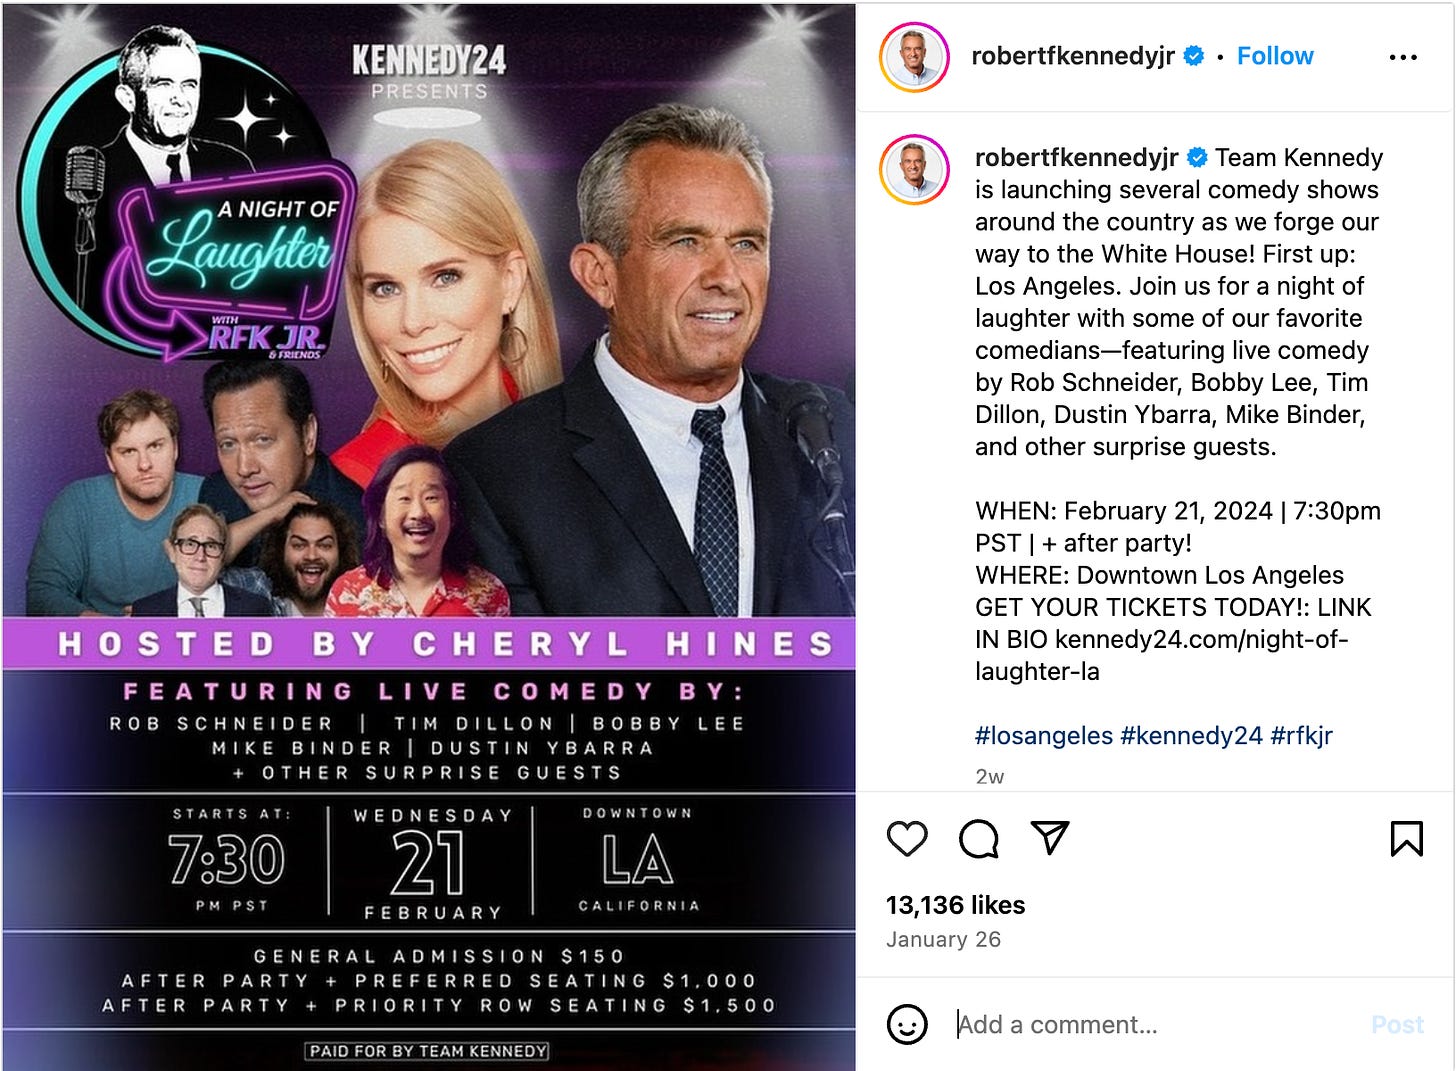 Team Kennedy is launching several comedy shows around the country as we forge our way to the White House! First up: Los Angeles. Join us for a night of laughter with some of our favorite comedians—featuring live comedy by Rob Schneider, Bobby Lee, Tim Dillon, Dustin Ybarra, Mike Binder, and other surprise guests.